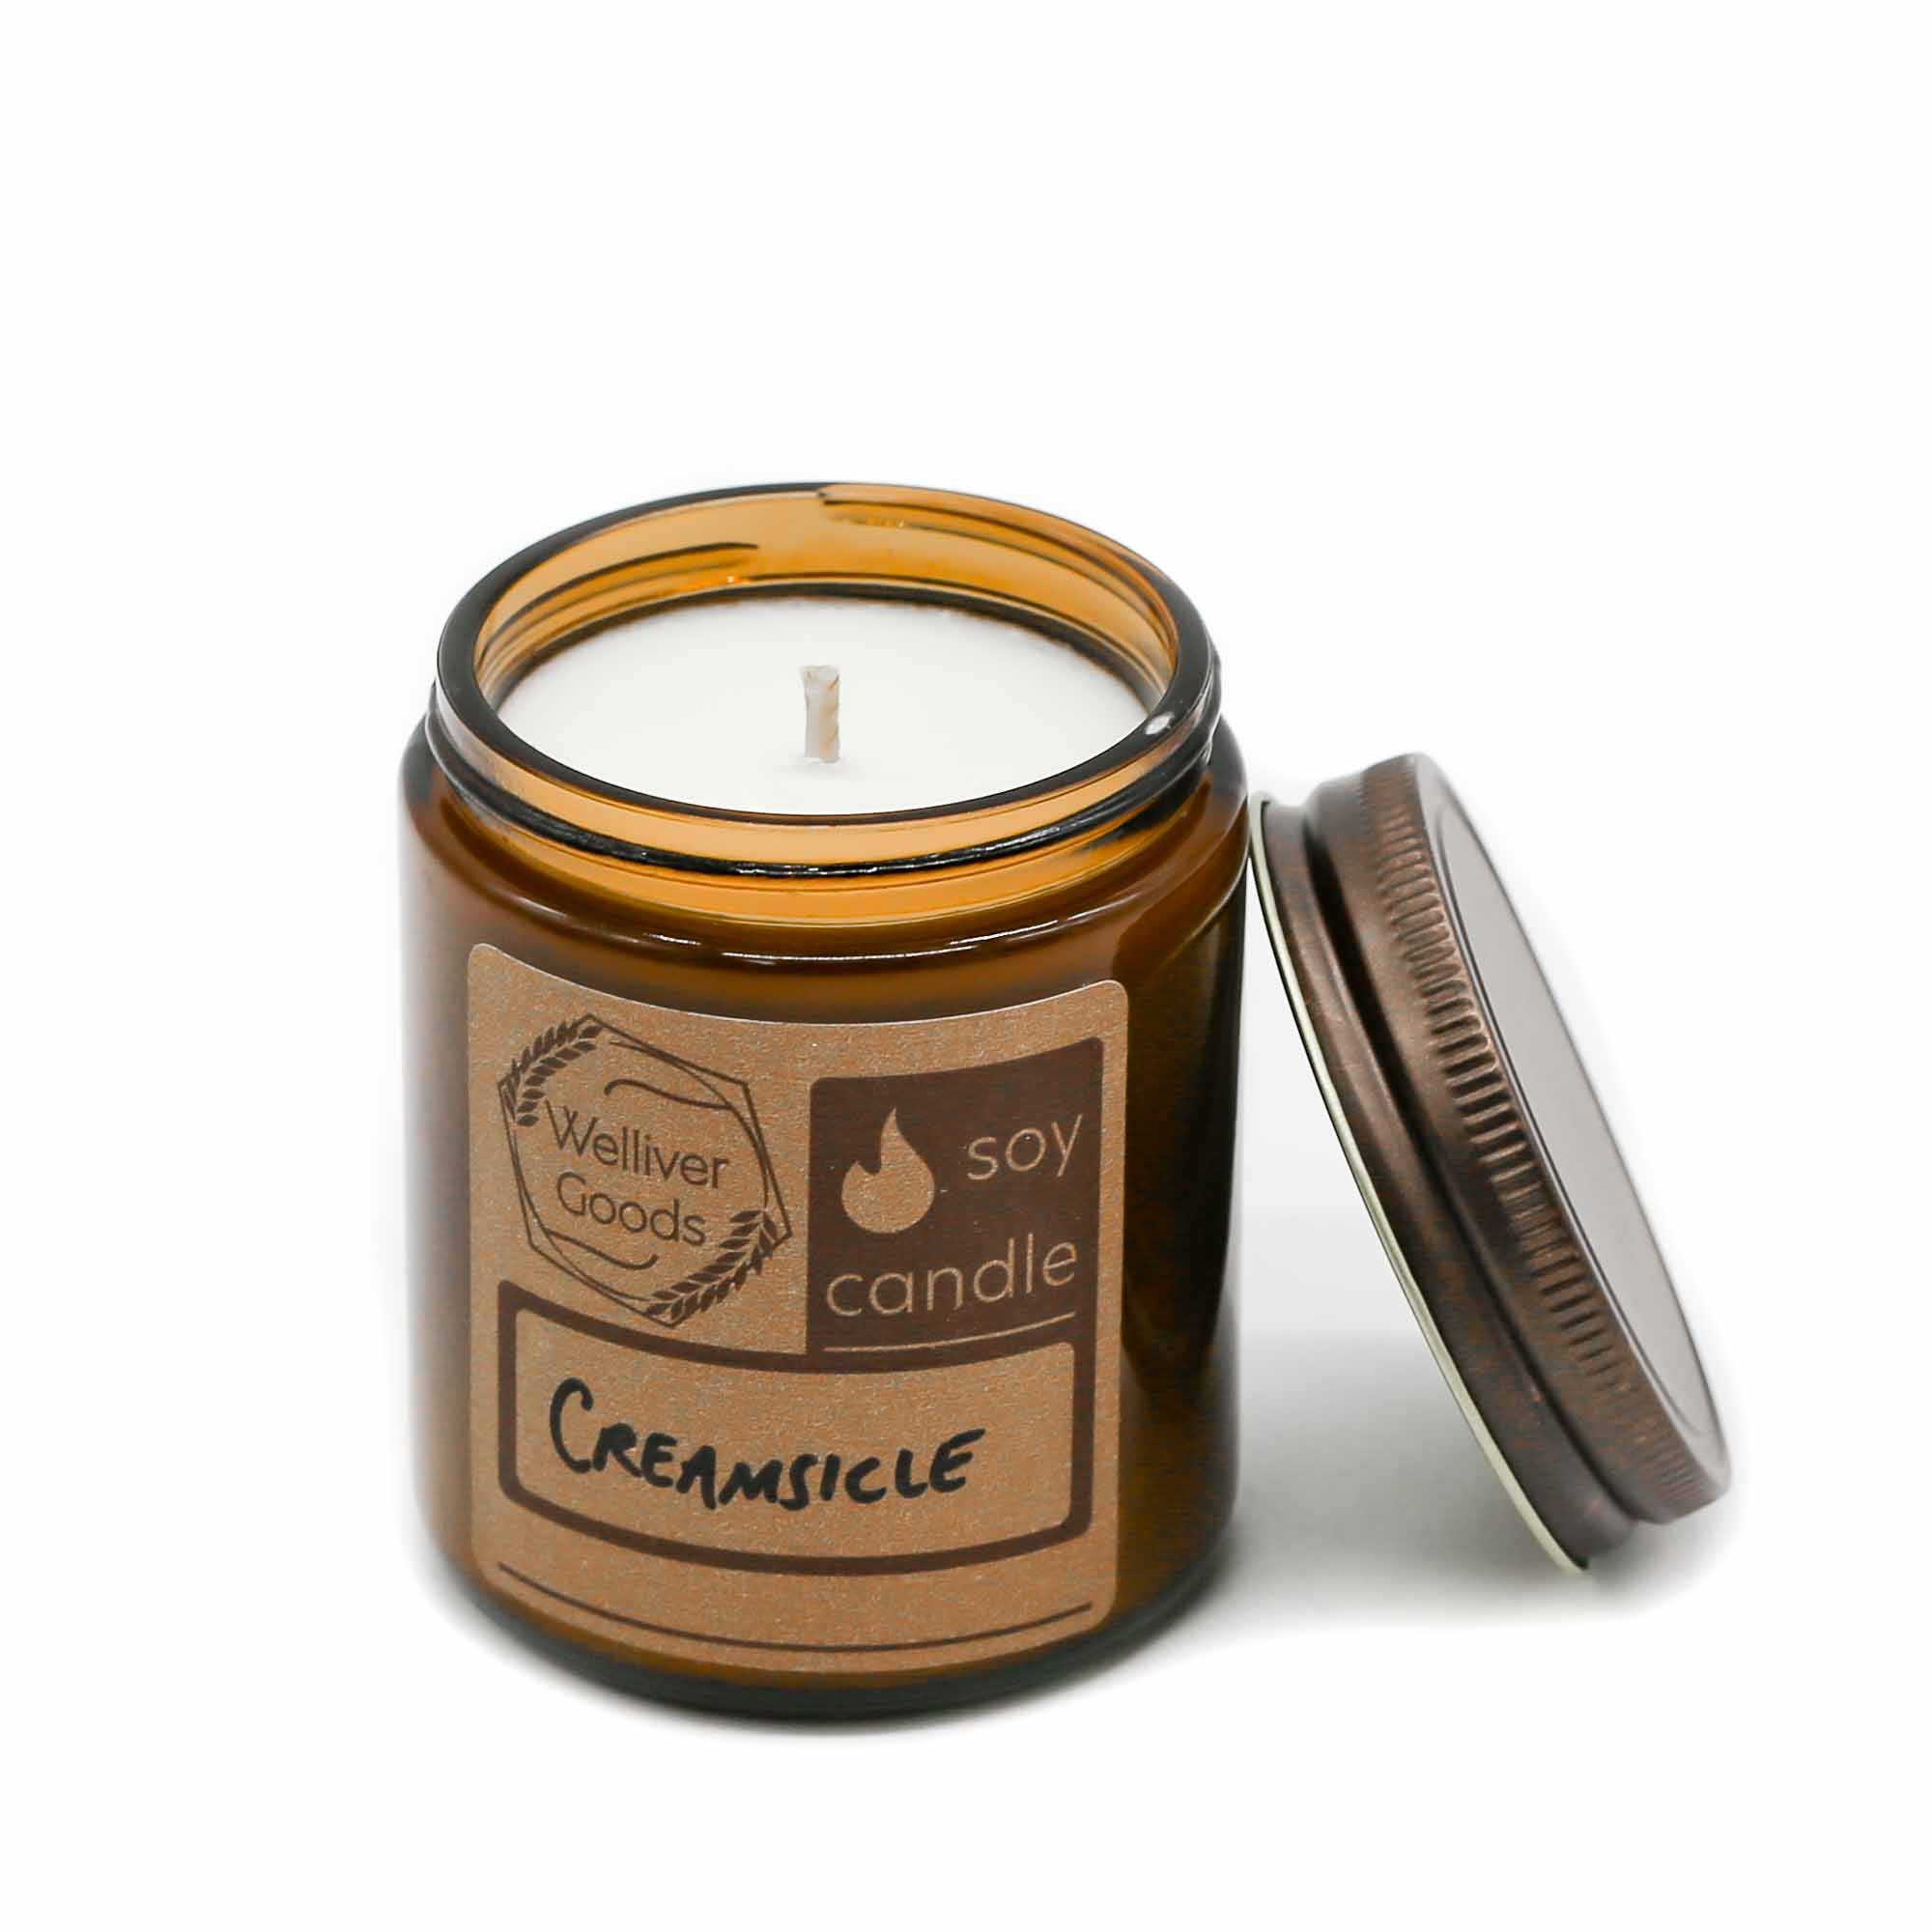 welliver goods candle - creamsicle - Mortise And Tenon